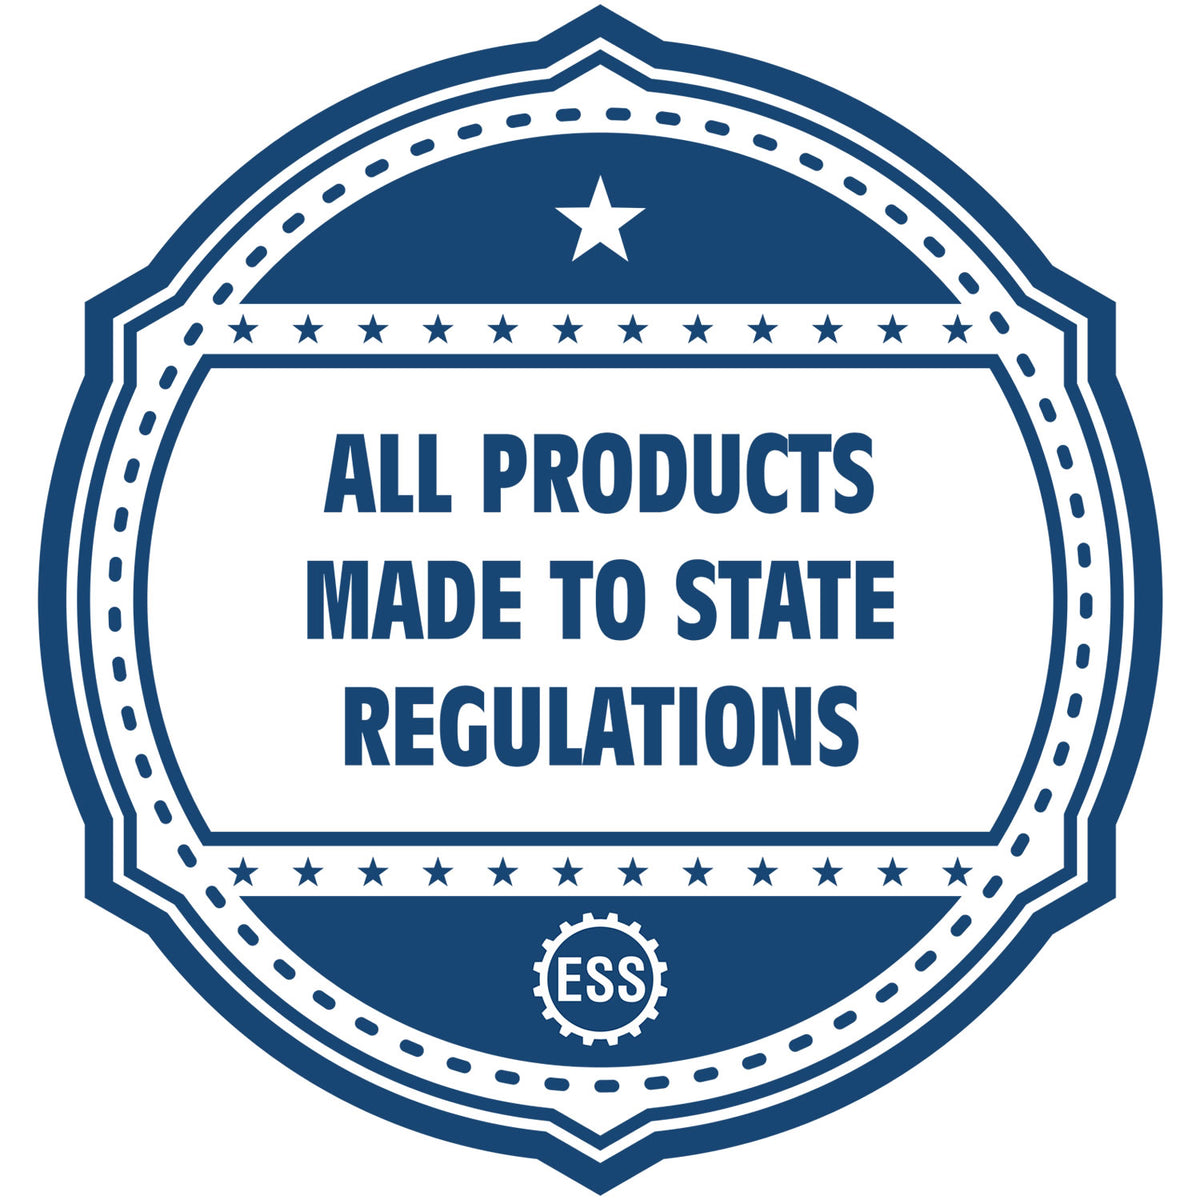 An icon or badge element for the State of Connecticut Extended Long Reach Engineer Seal showing that this product is made in compliance with state regulations.